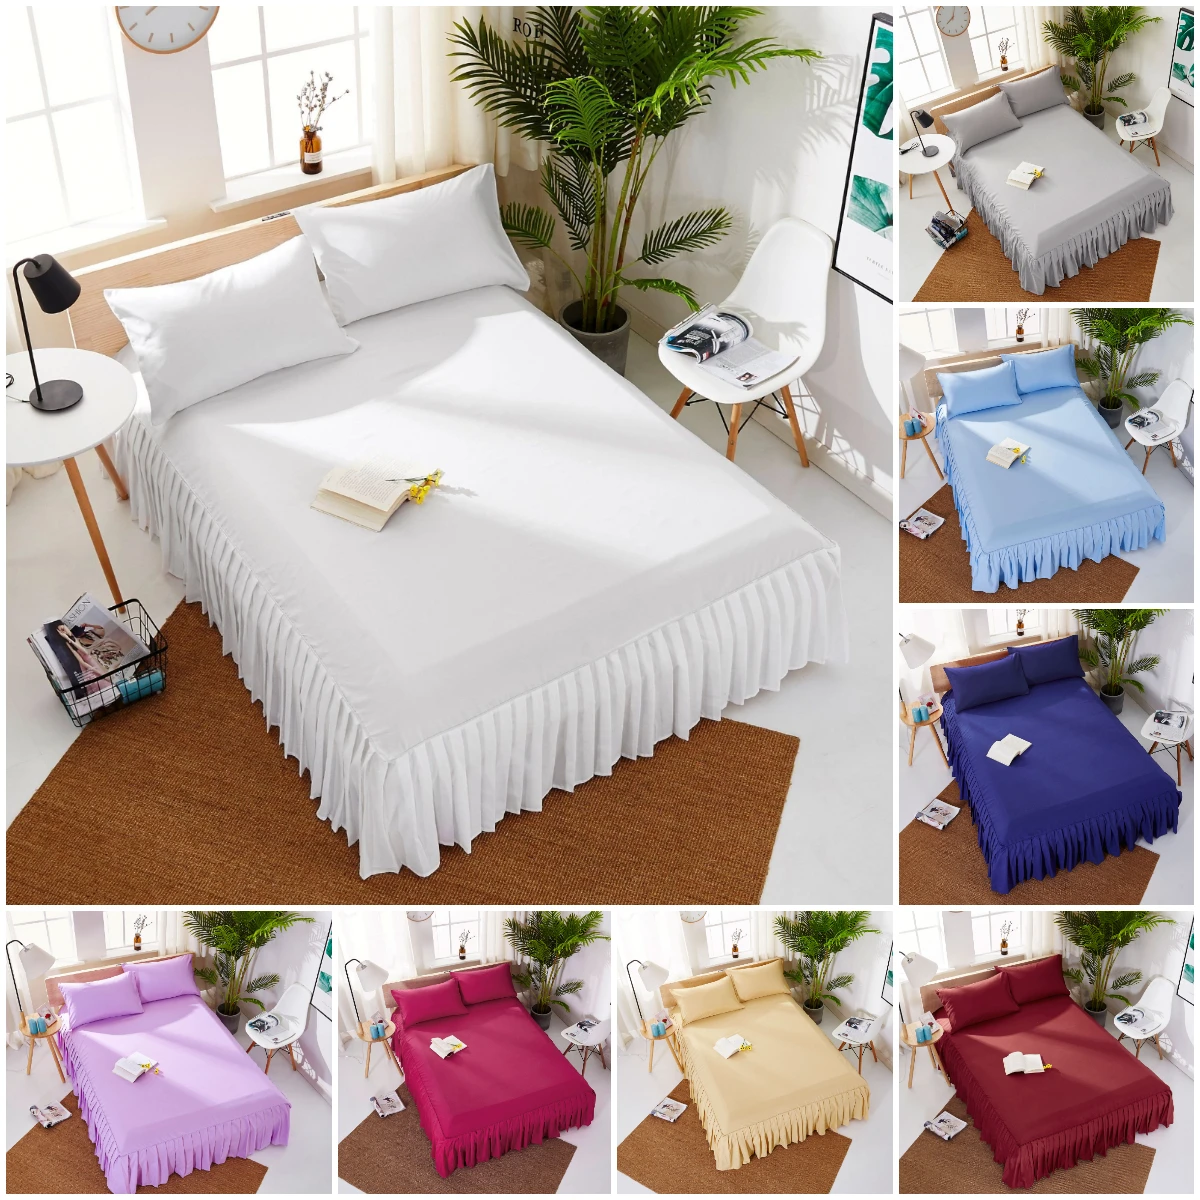 https://ae01.alicdn.com/kf/Ha66e596ed463426fbc8ab352d4d3fe03U/European-Pure-Color-Bedspreads-Bedskirt-Bed-Sheet-Combined-Bed-Covers-Super-Soft-Colchas-Queen-King-Size.jpg